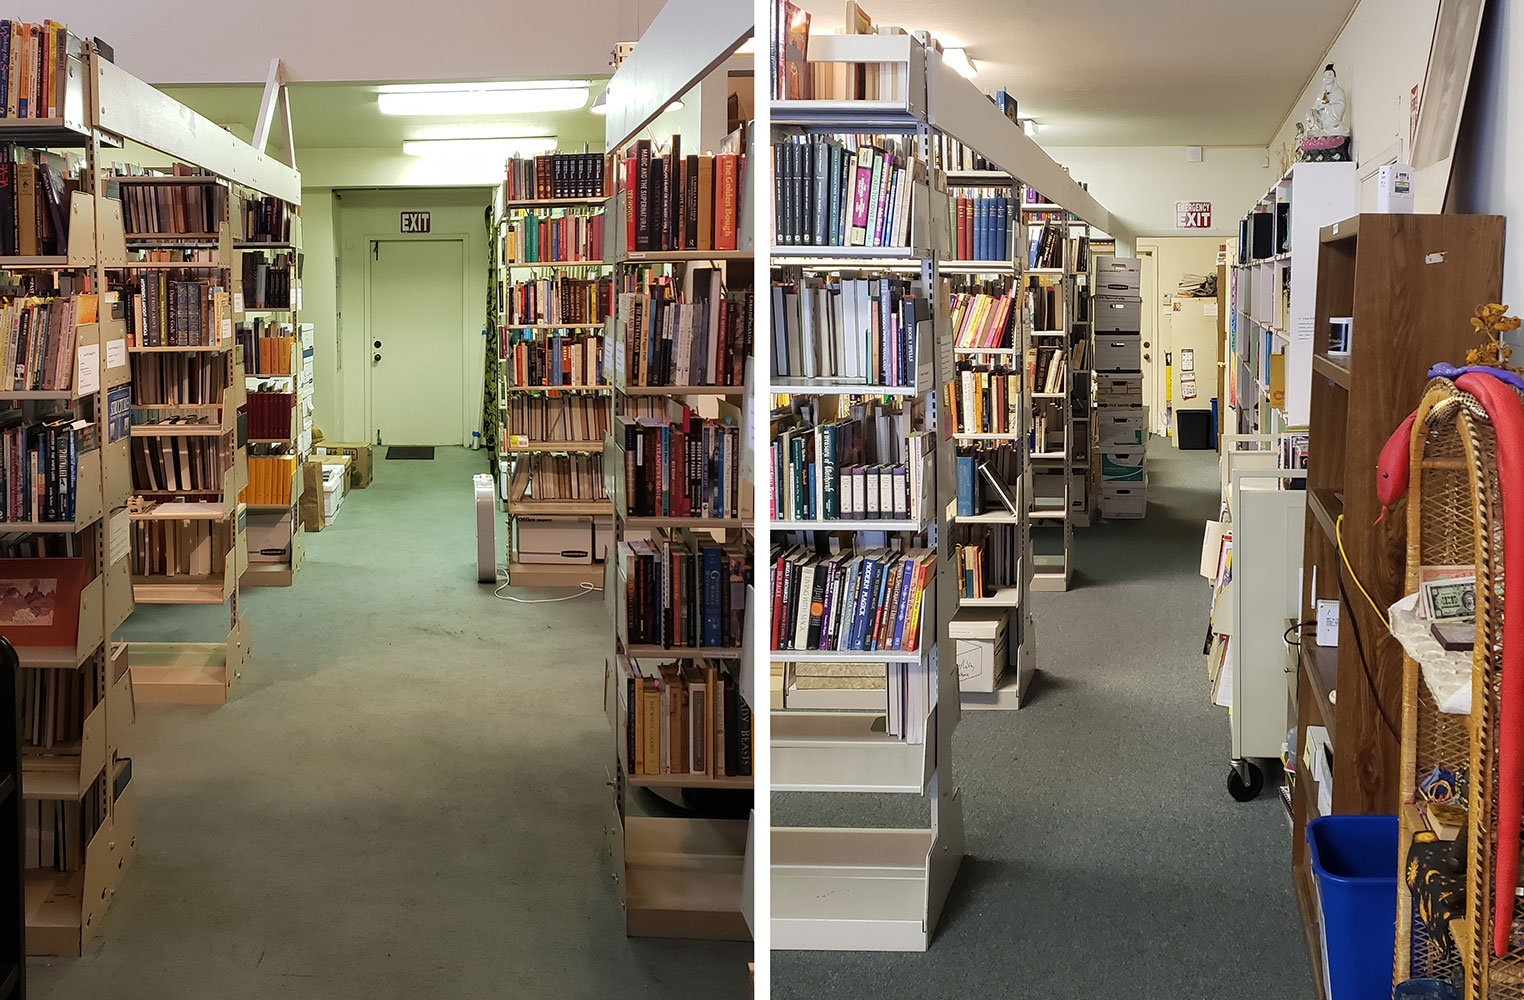 Shelves of books at the Adocentyn Library